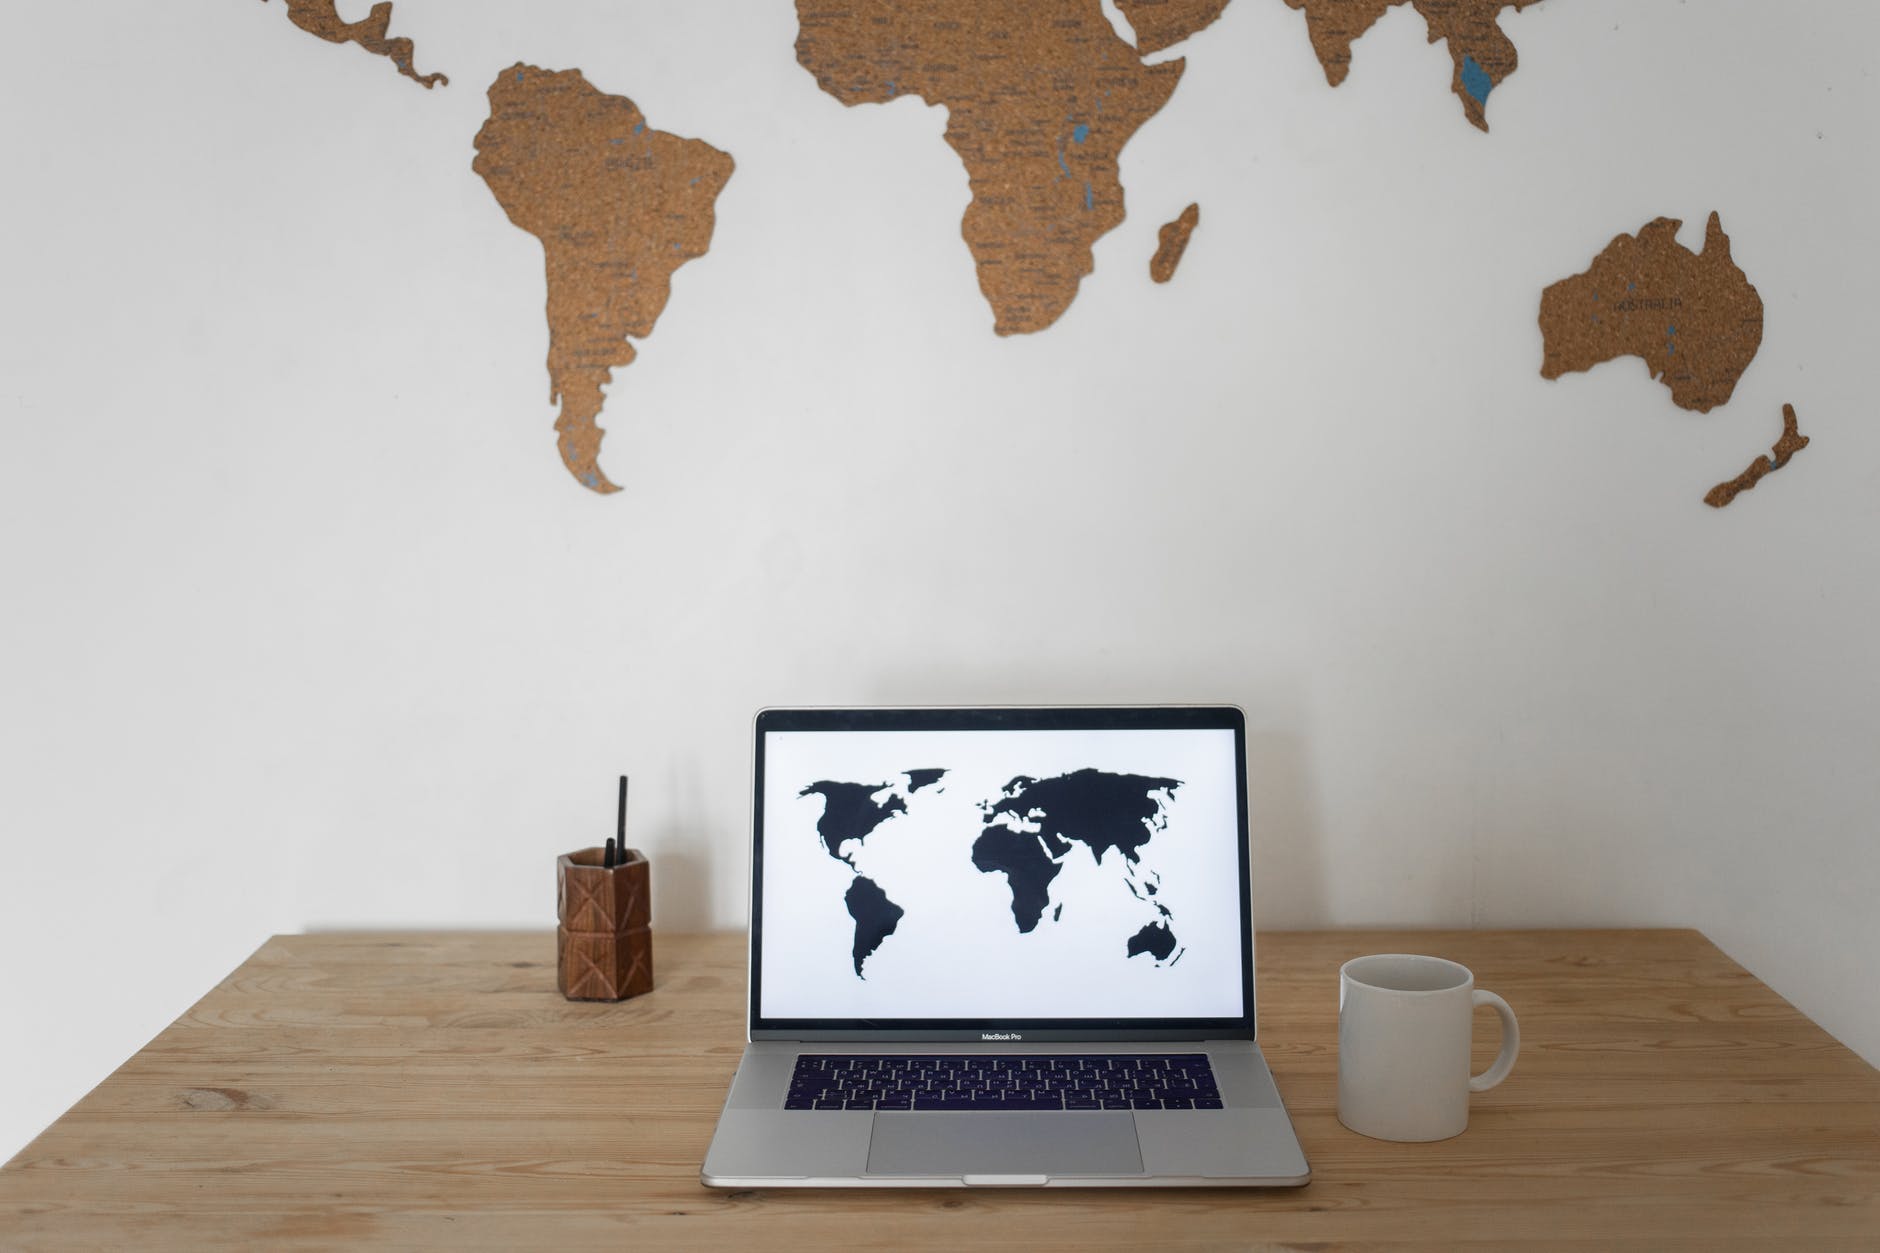 World map on wall and remote working laptop near cup and container - Global business travel

Photo by Monstera on Pexels.com